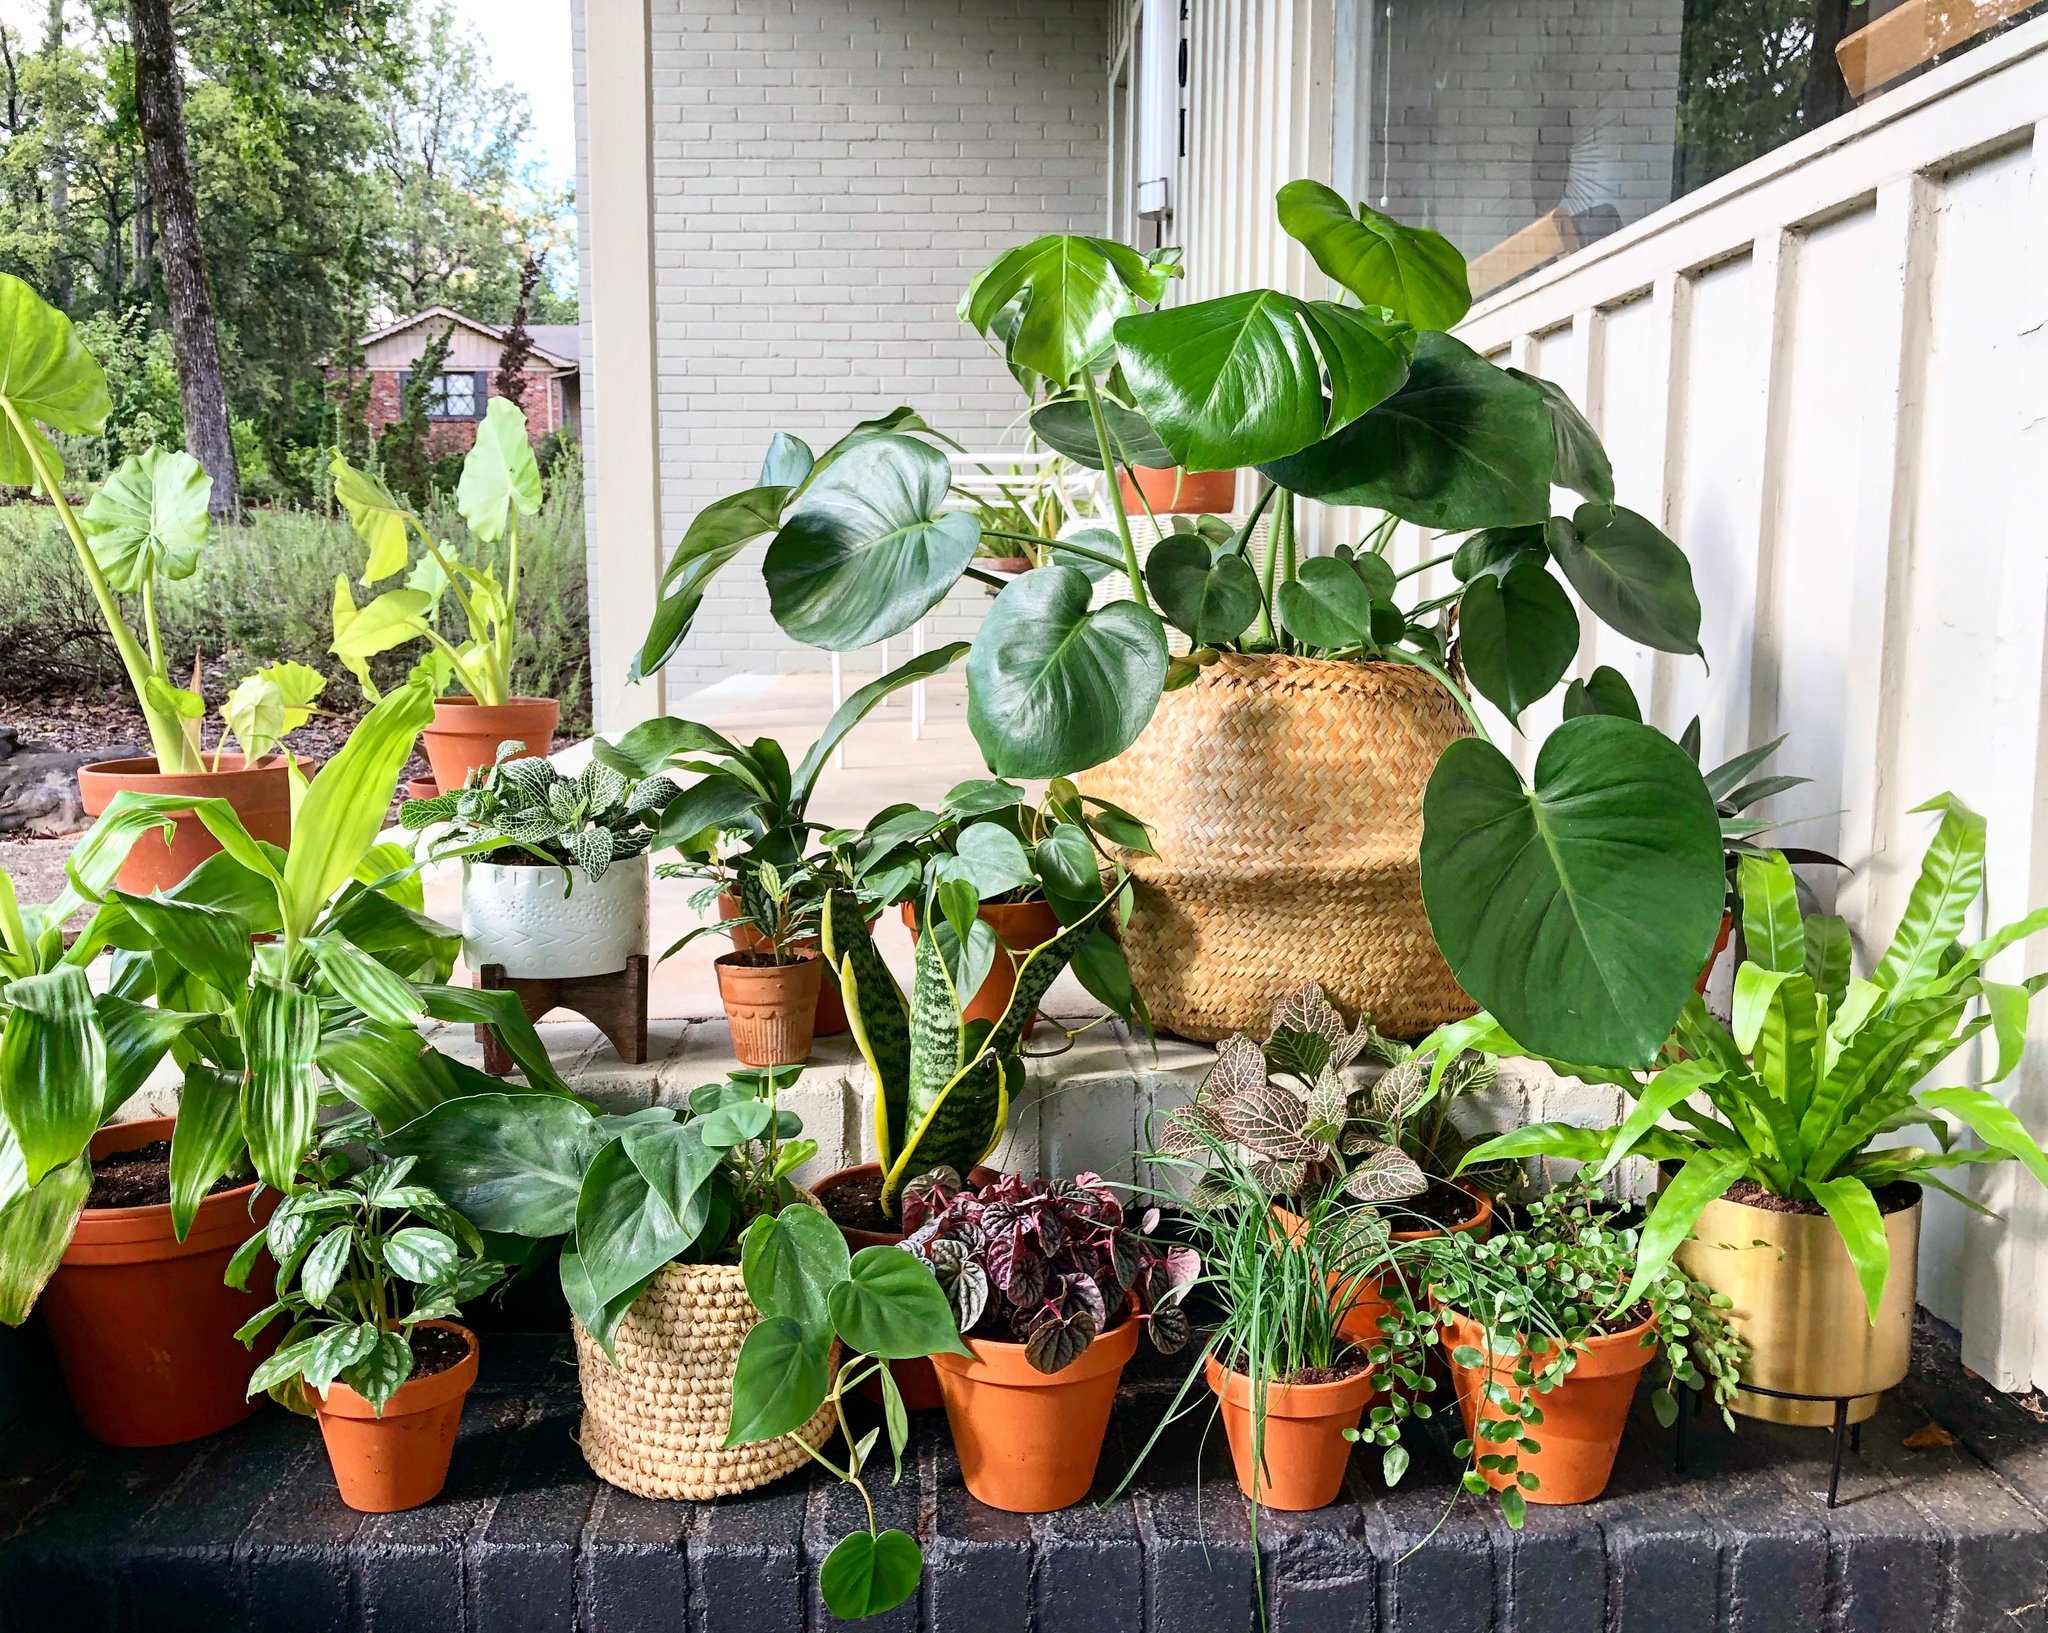 2 Grow Tropical Houseplants 5 new plant skills you can learn this winter+spring, including caring for houseplants